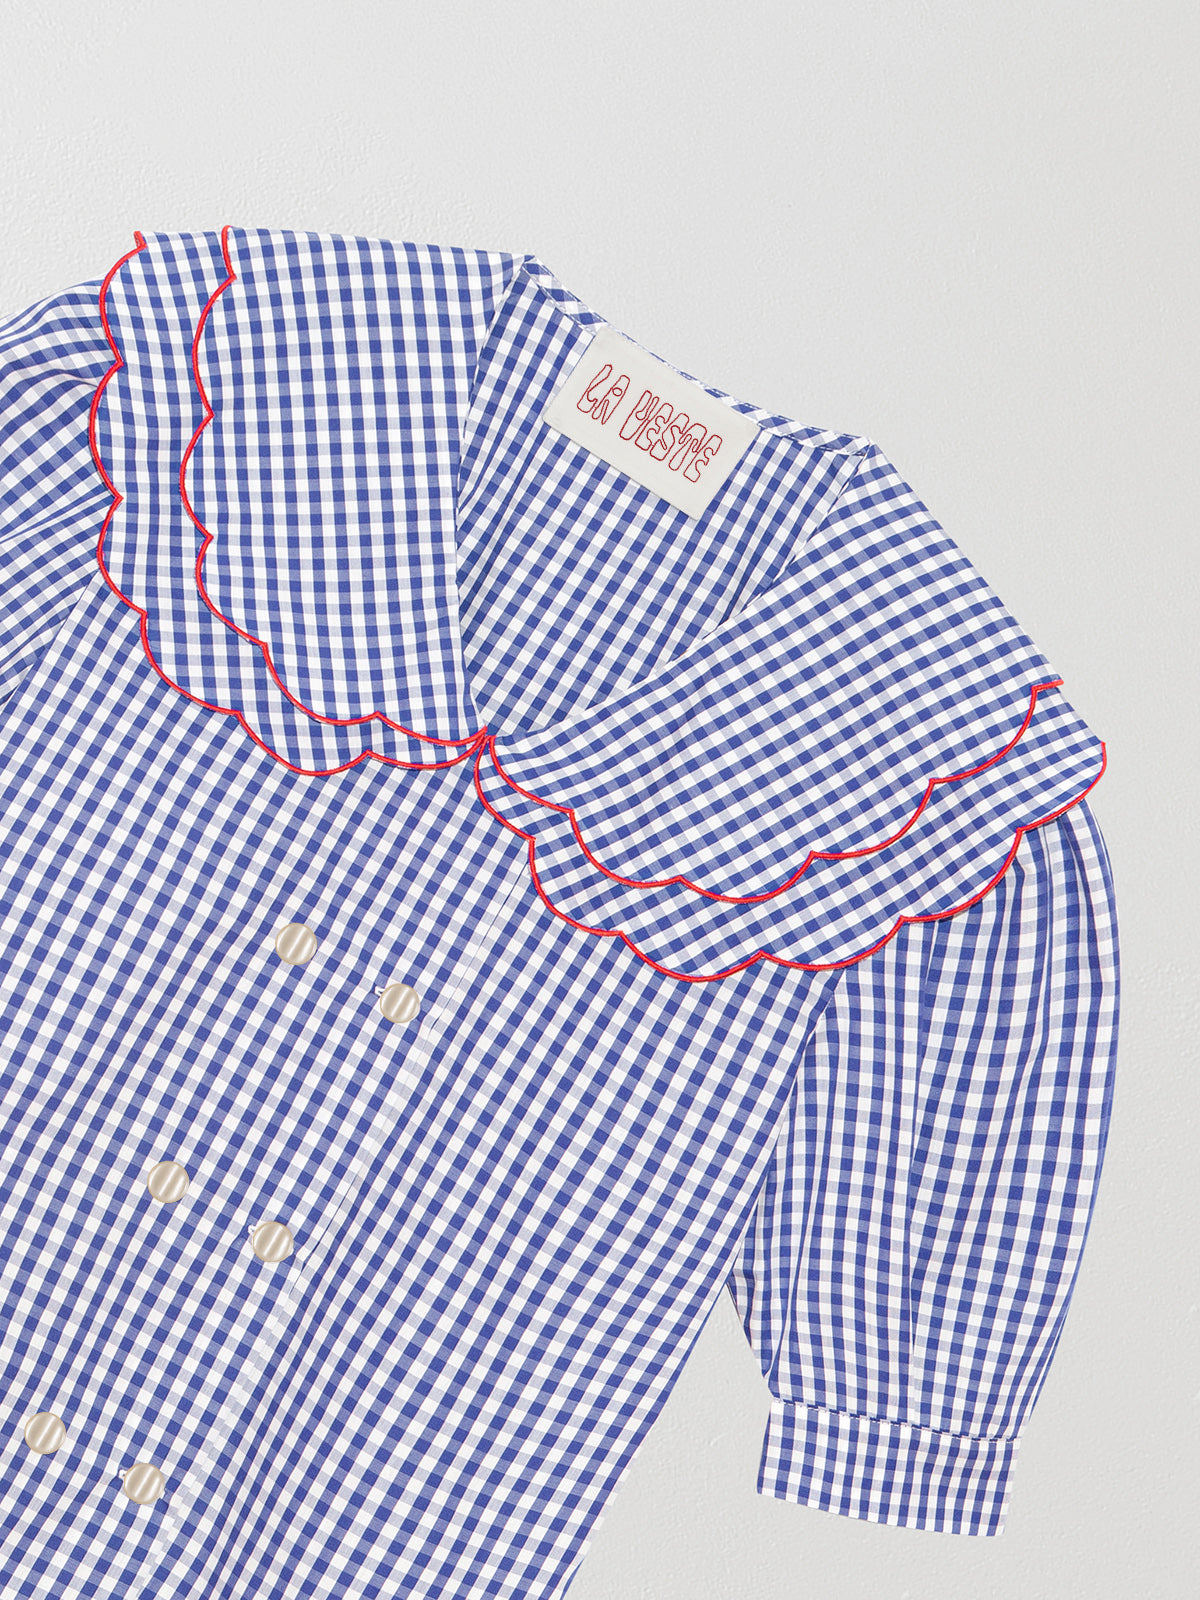 Navy and white vichy check shirt with short sleeves made in cotton